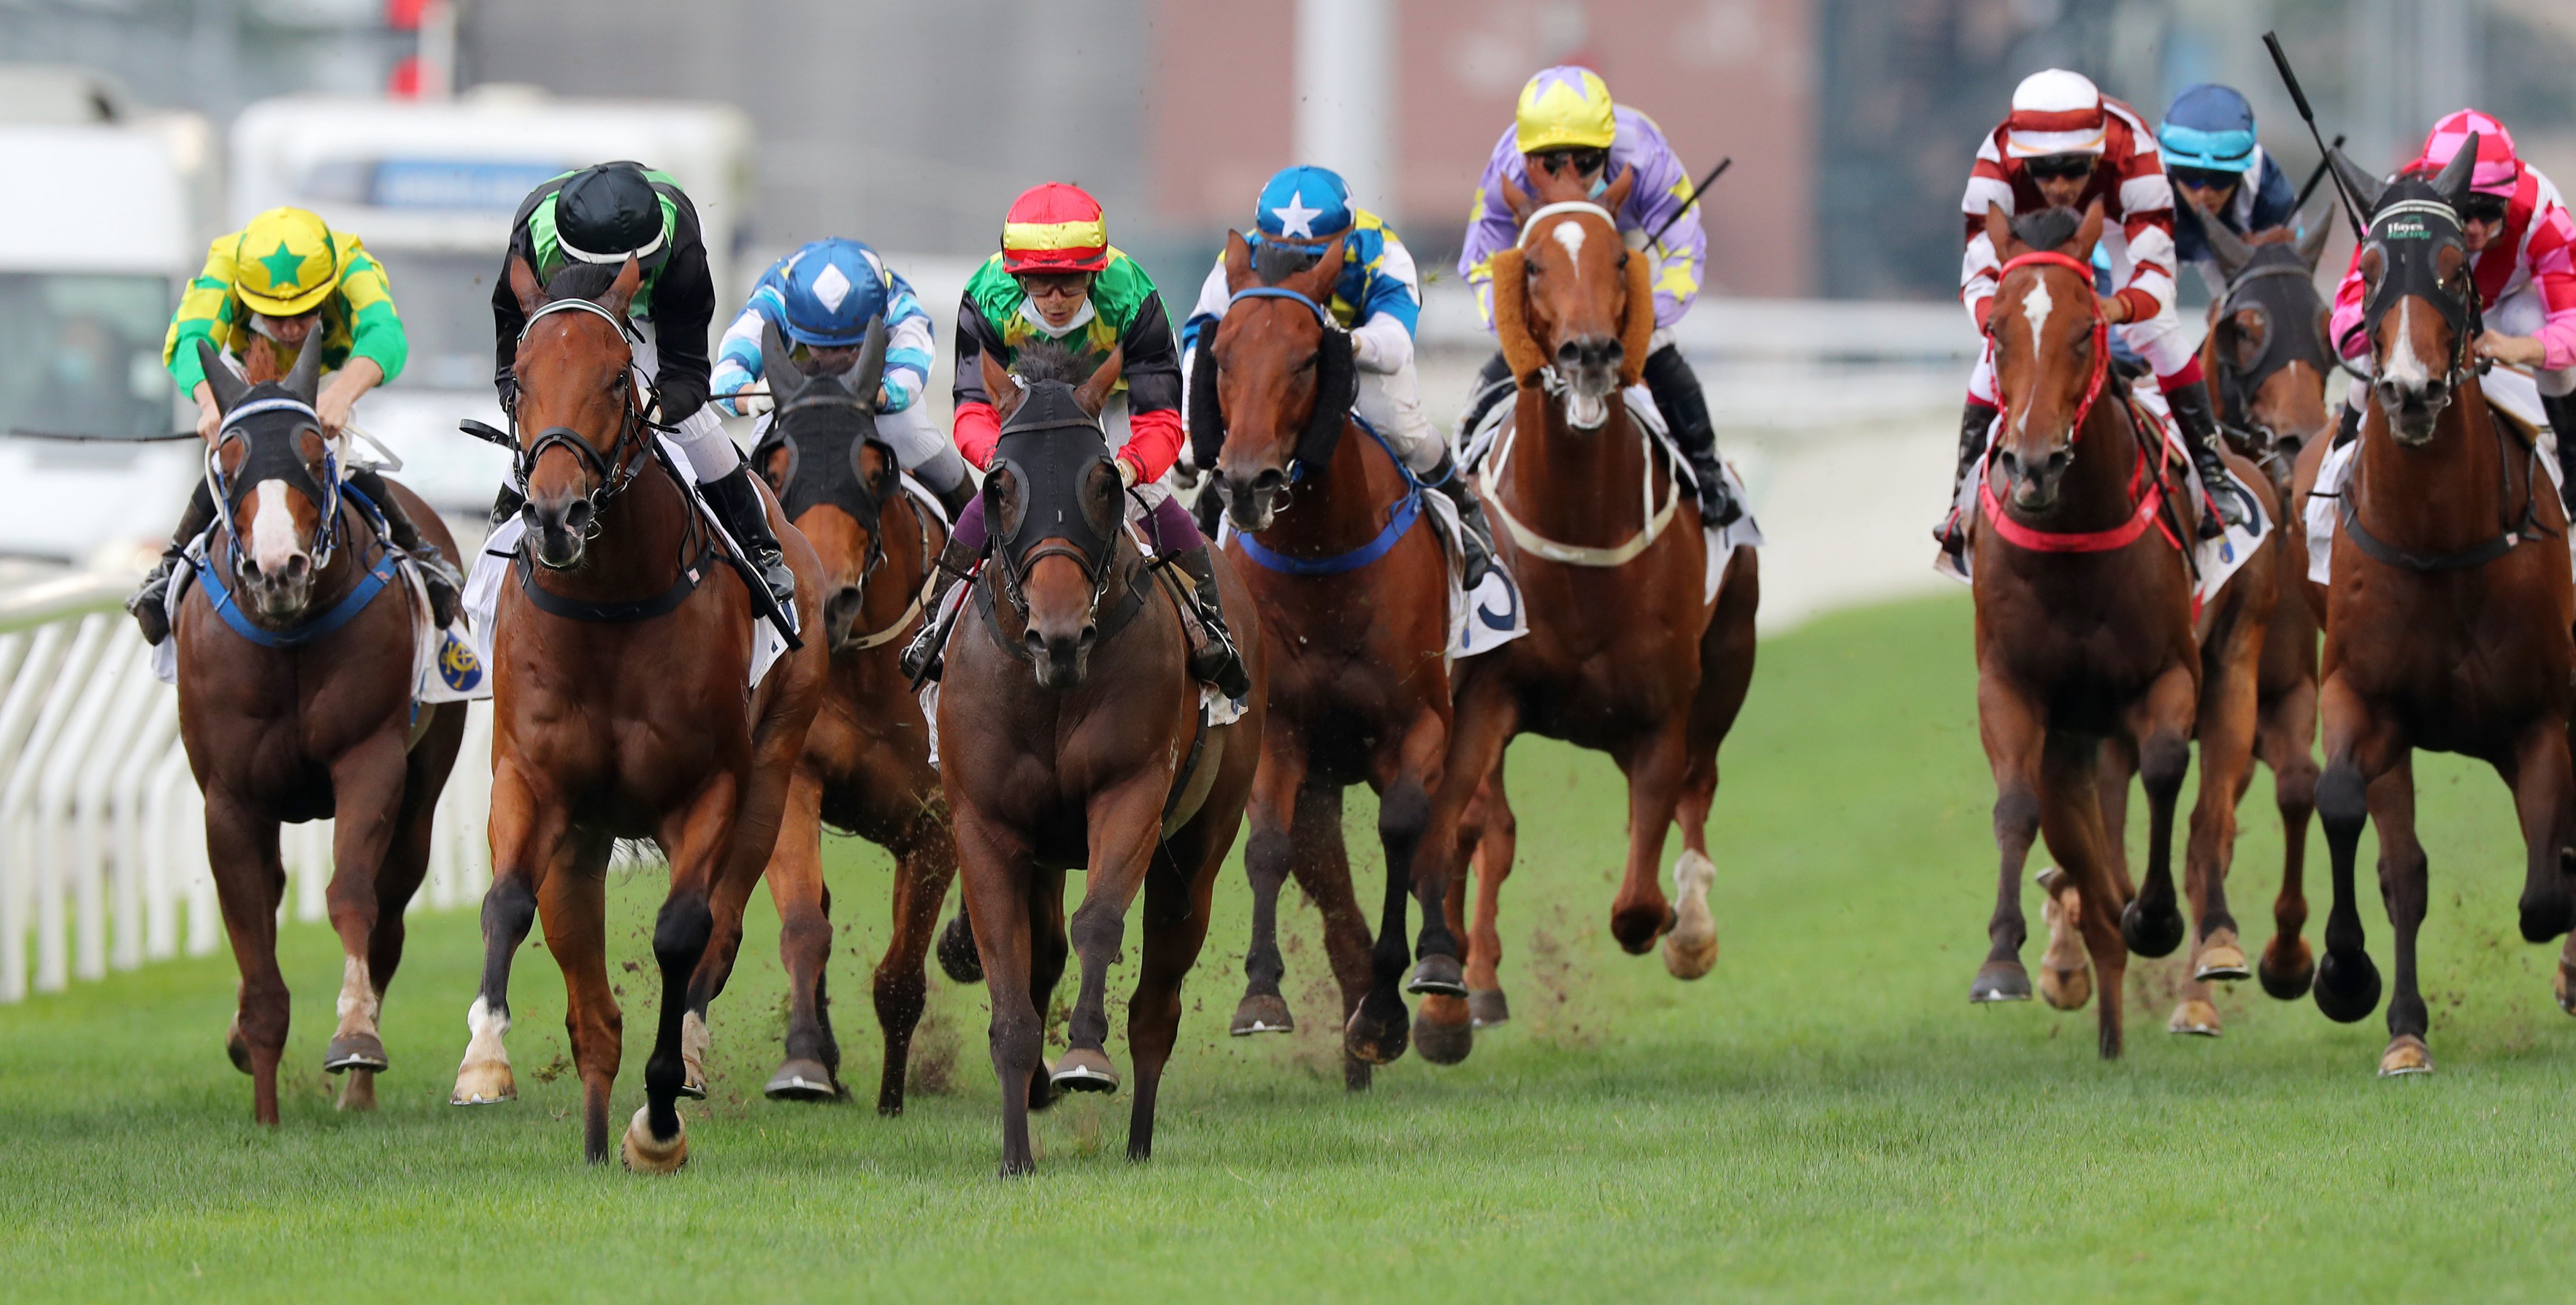 Cordyceps Six (red and yellow cap) wins the Sha Tin Vase in May. Photos: Kenneth Chan